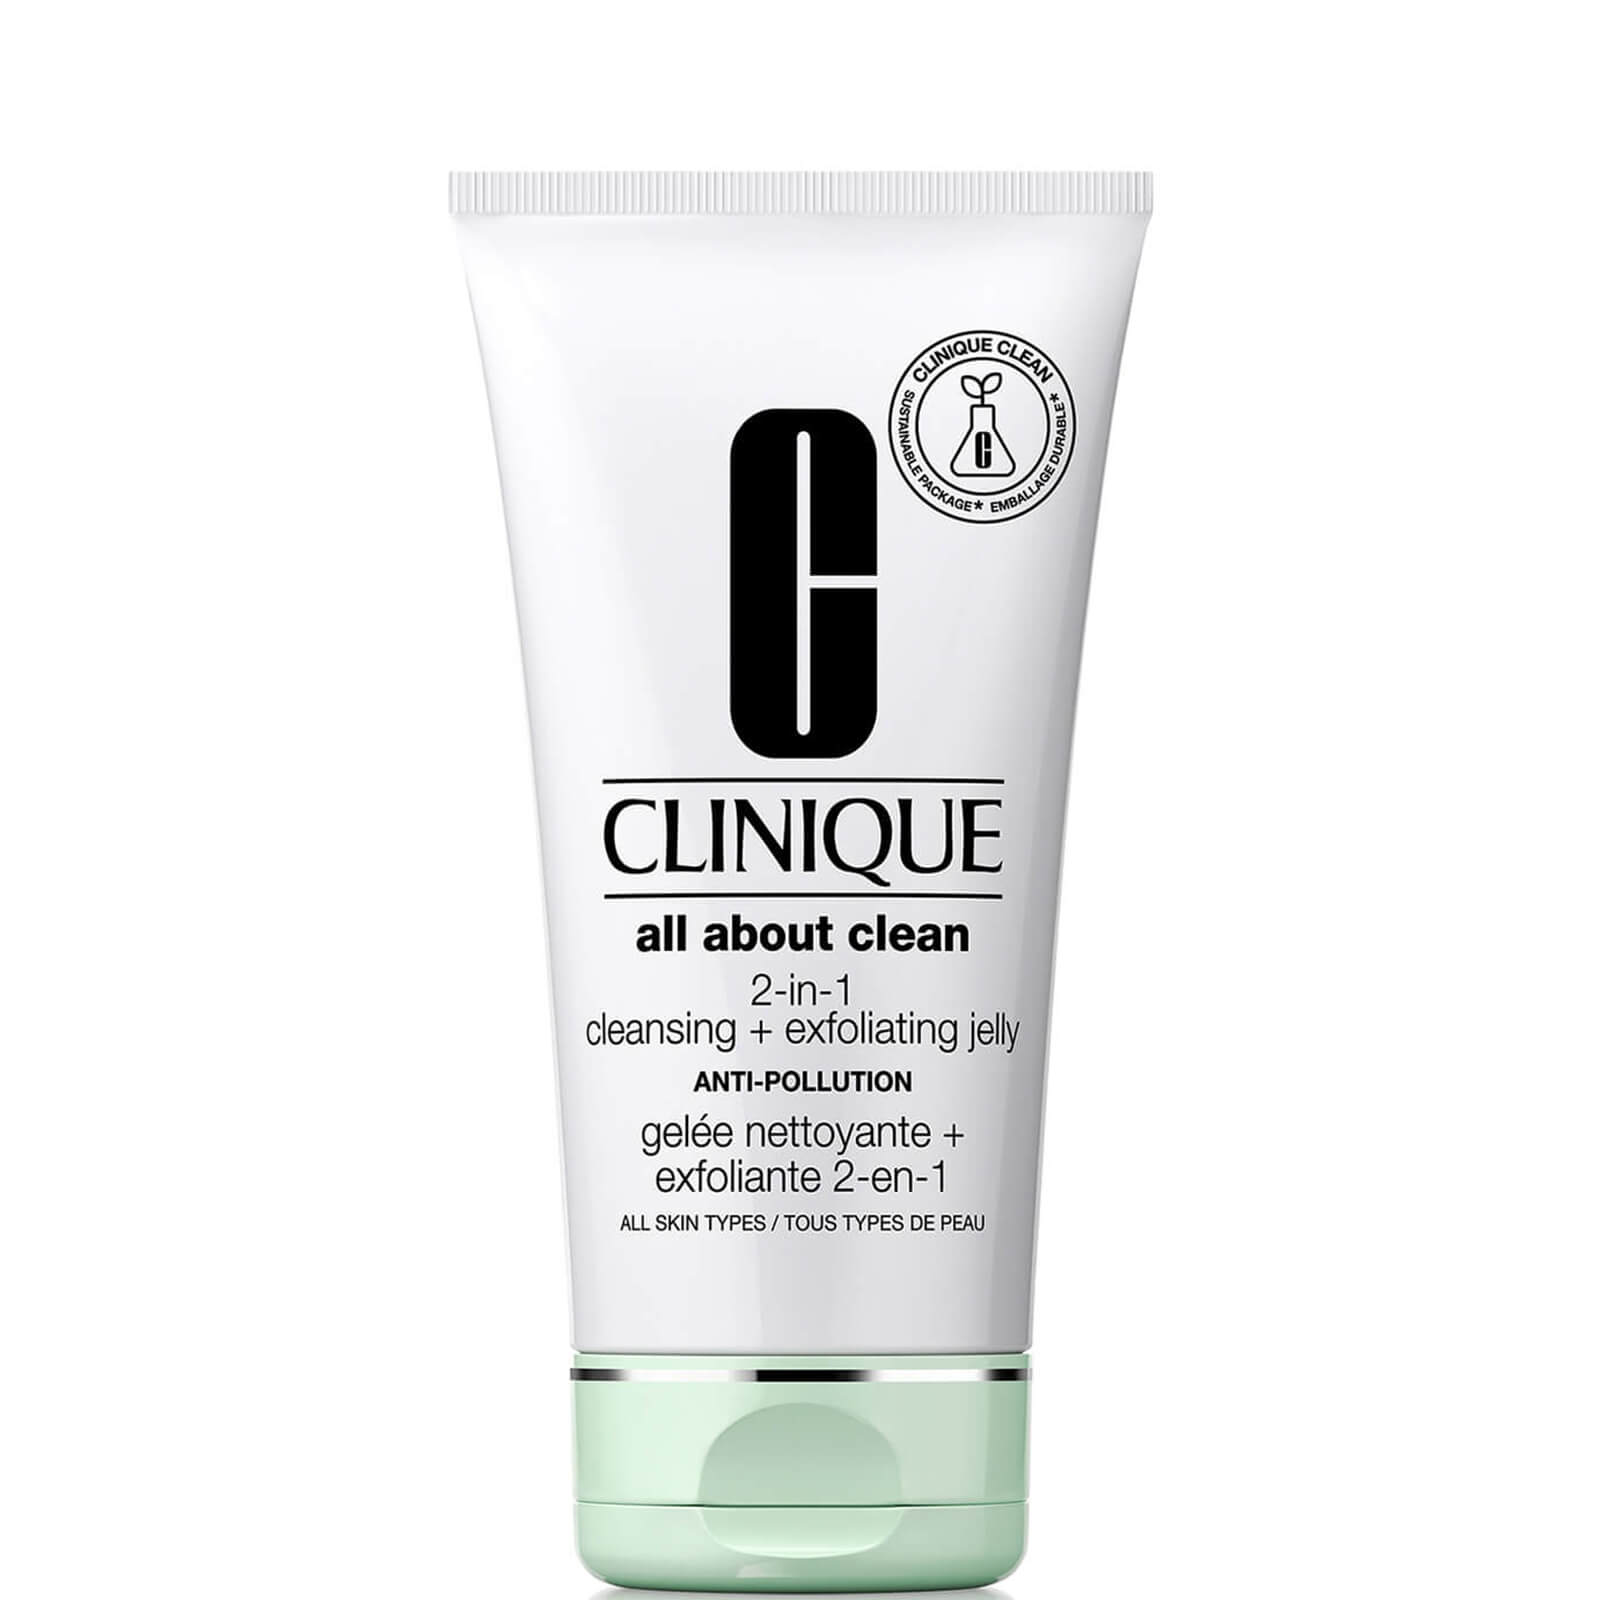 Image of Gelatina Detergente ed Esfoliante All About Clean 2-in-1 Clinique 150ml